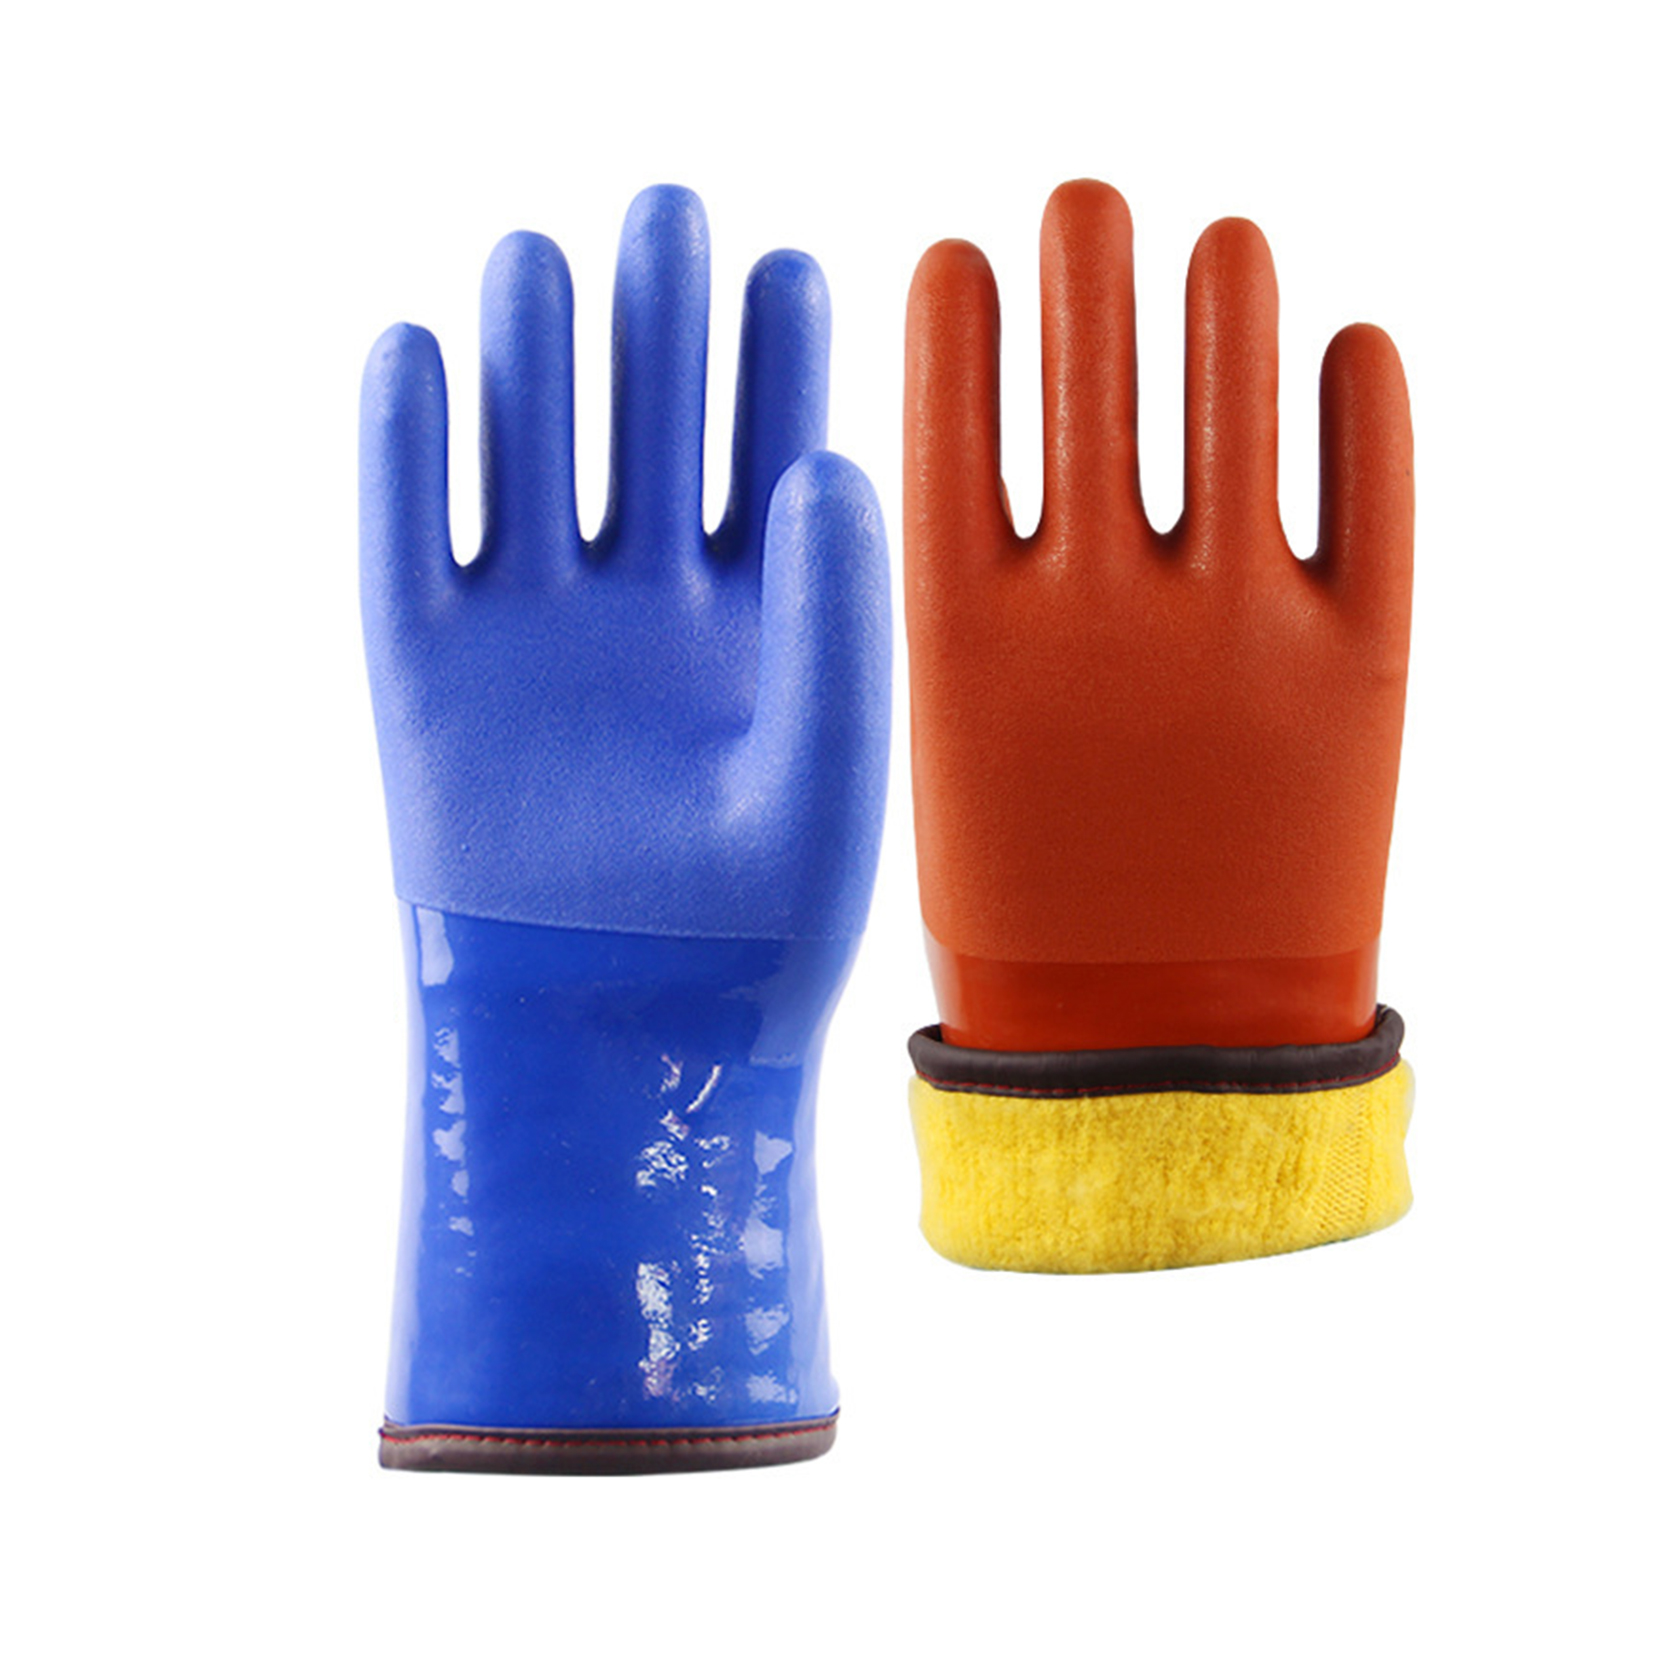 Heavy Duty PVC Coated Work Gloves Chemical & Liquid Resistant Industry Gloves